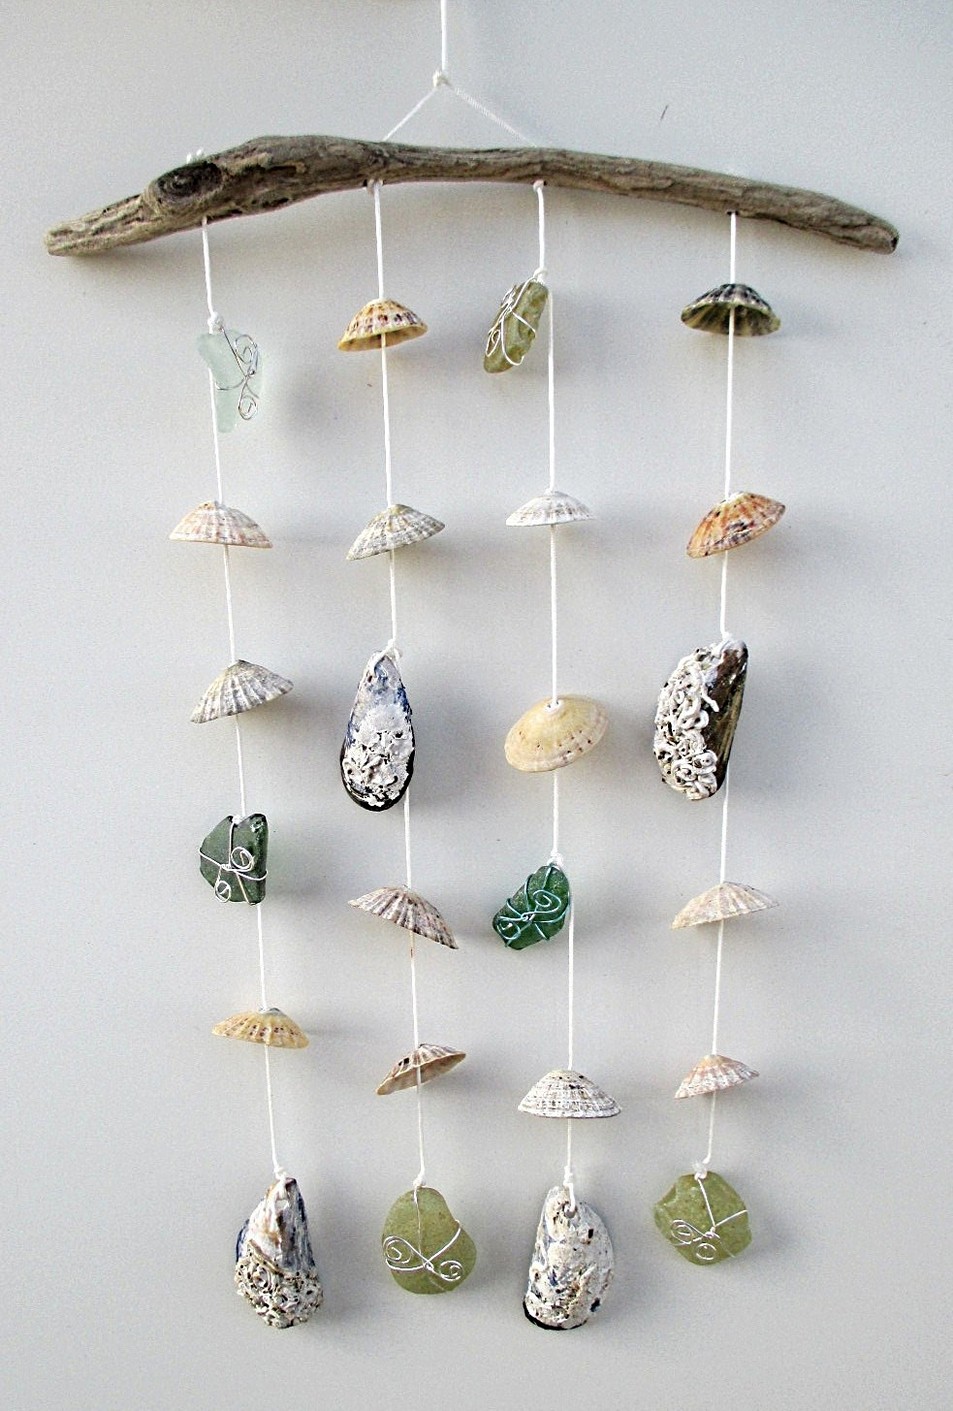 http://www.iconhomedesign.com/diy-wind-chimes-ideas-to-create-beautiful-decoration.html/diy-seashell-wind-chimes